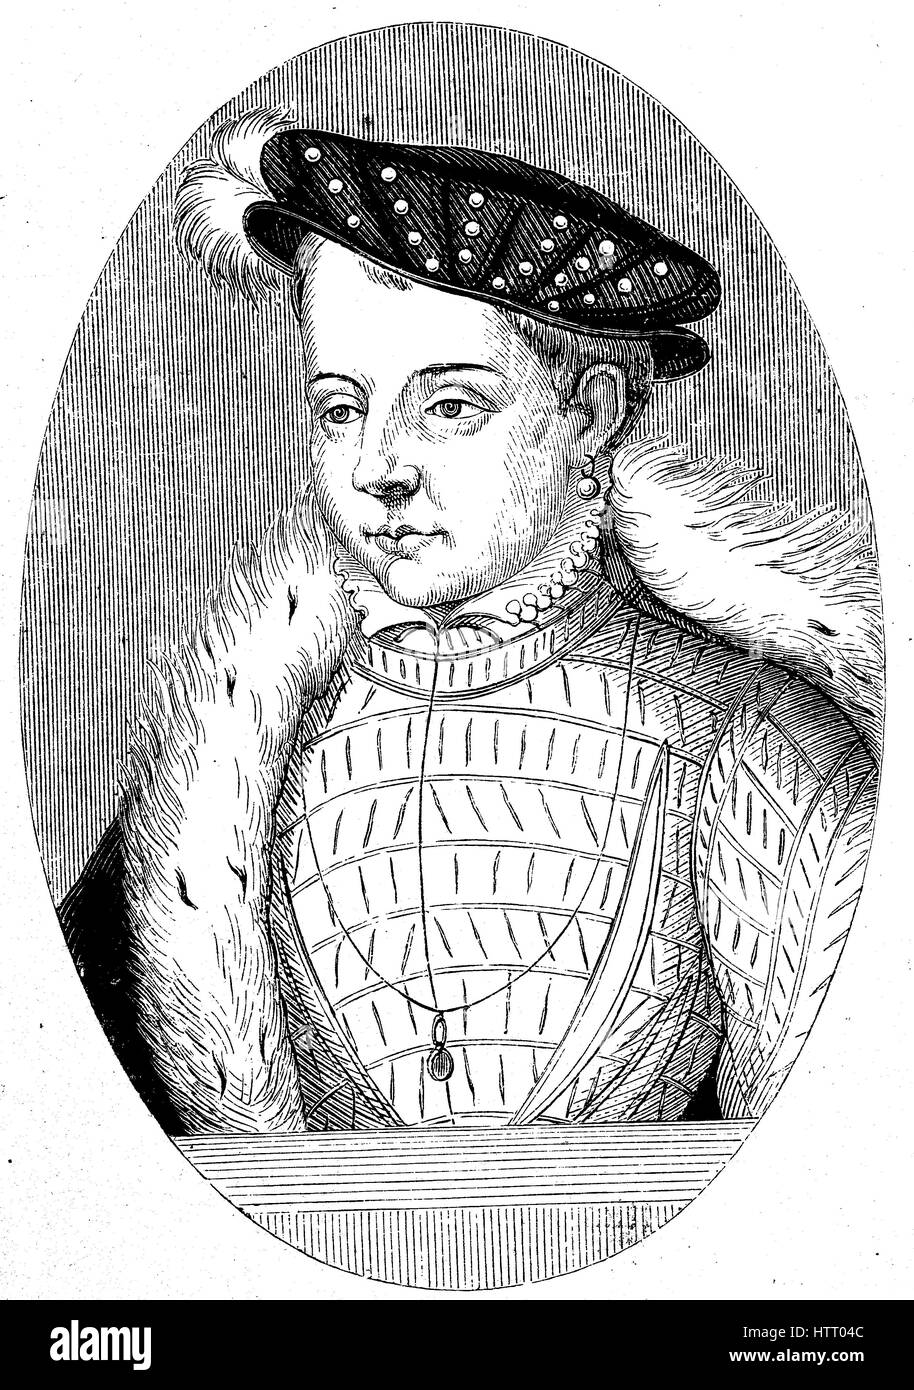 Francis II, Francois II, 19 January 1544 - 5 December 1560, a monarch of the House of Valois-Angouleme who was King of France from 1559 to 1560. He was also King consort of Scotland, reproduction of a woodcut from the year 1880, digital improved Stock Photo